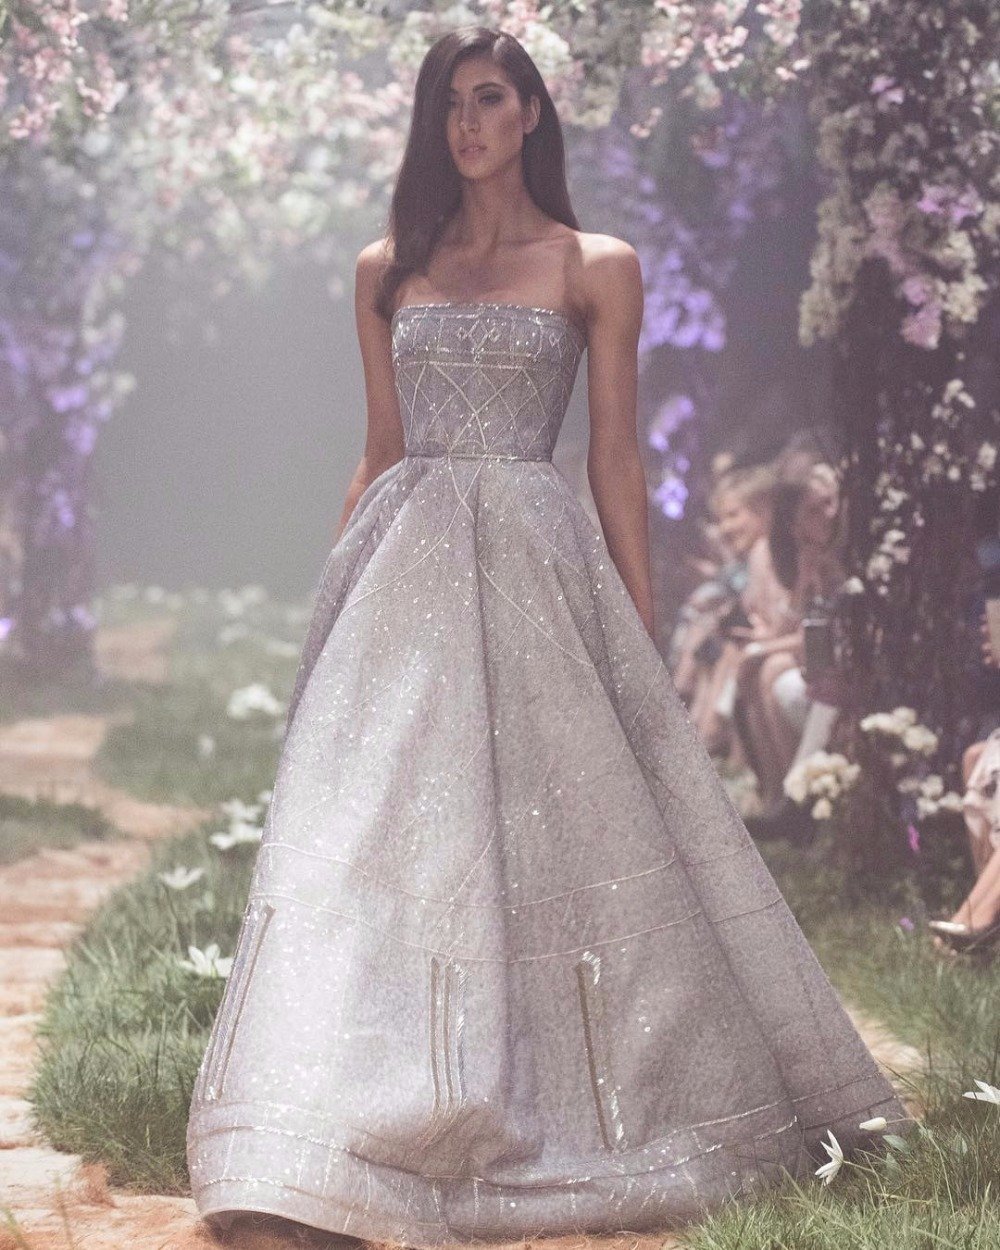 626218_new-disney-wedding-dresses-by-paolo